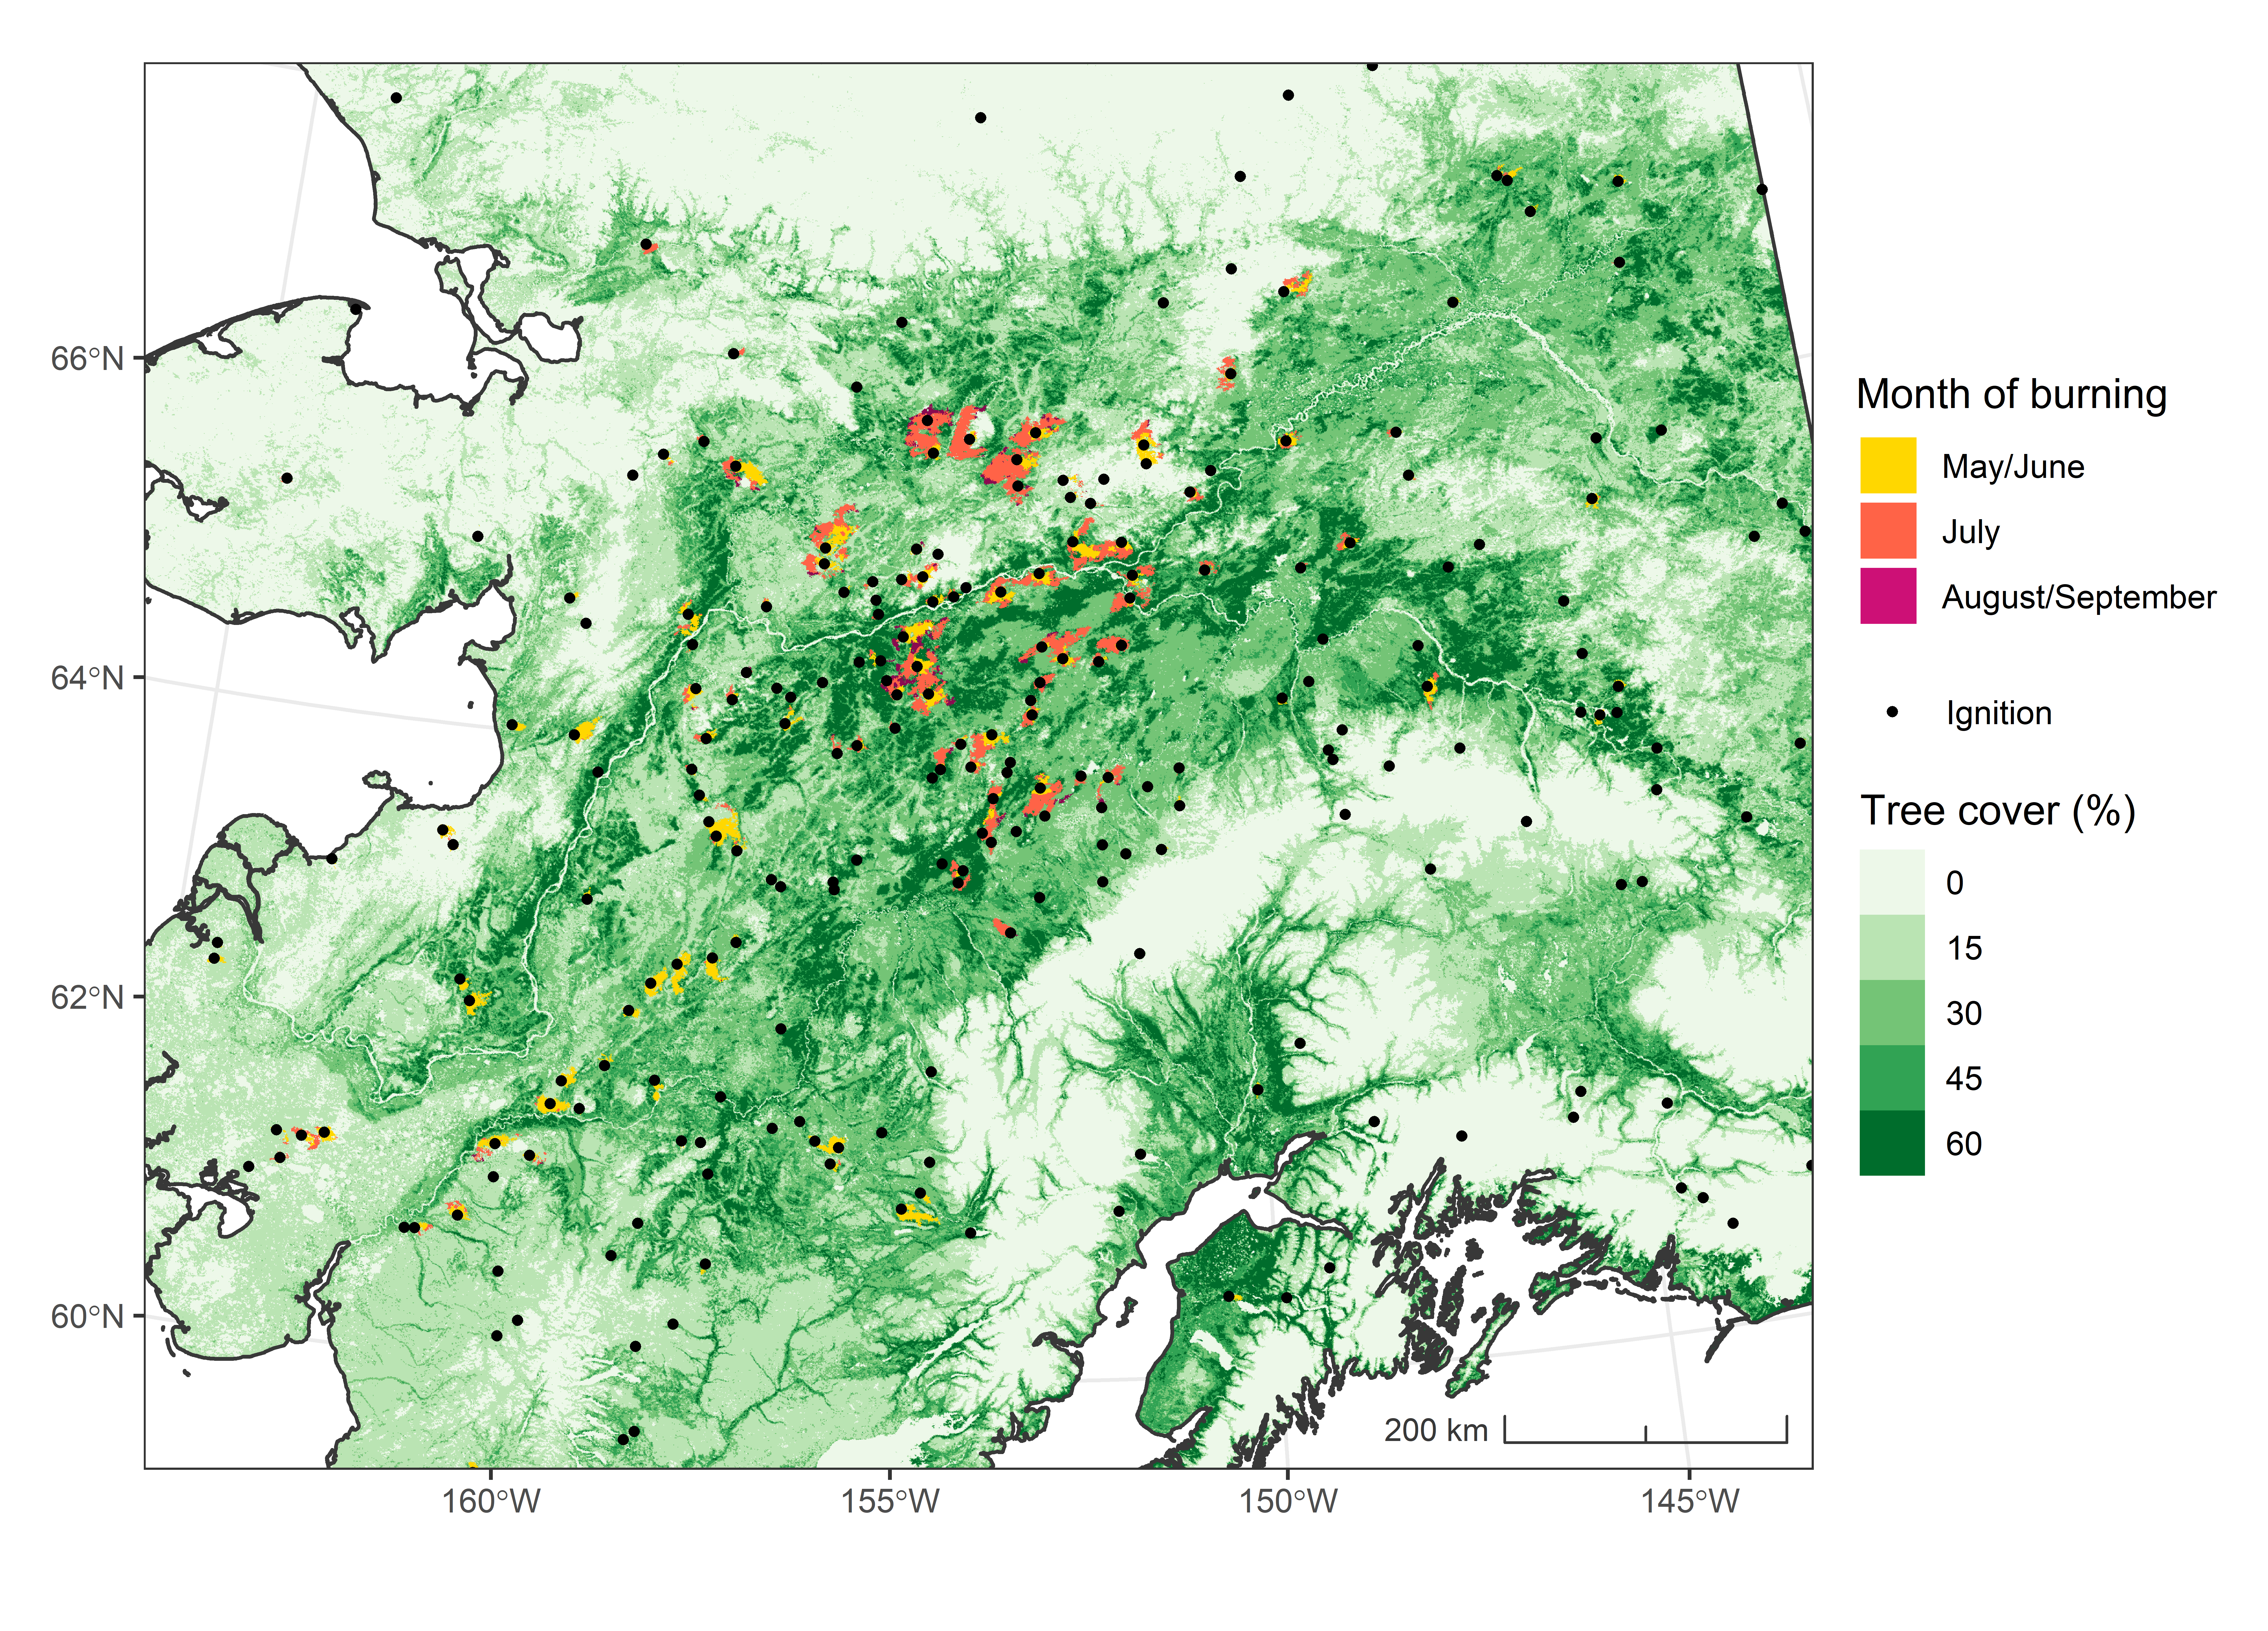 Ignition locations and burned area for Interior Alaska in 2015.